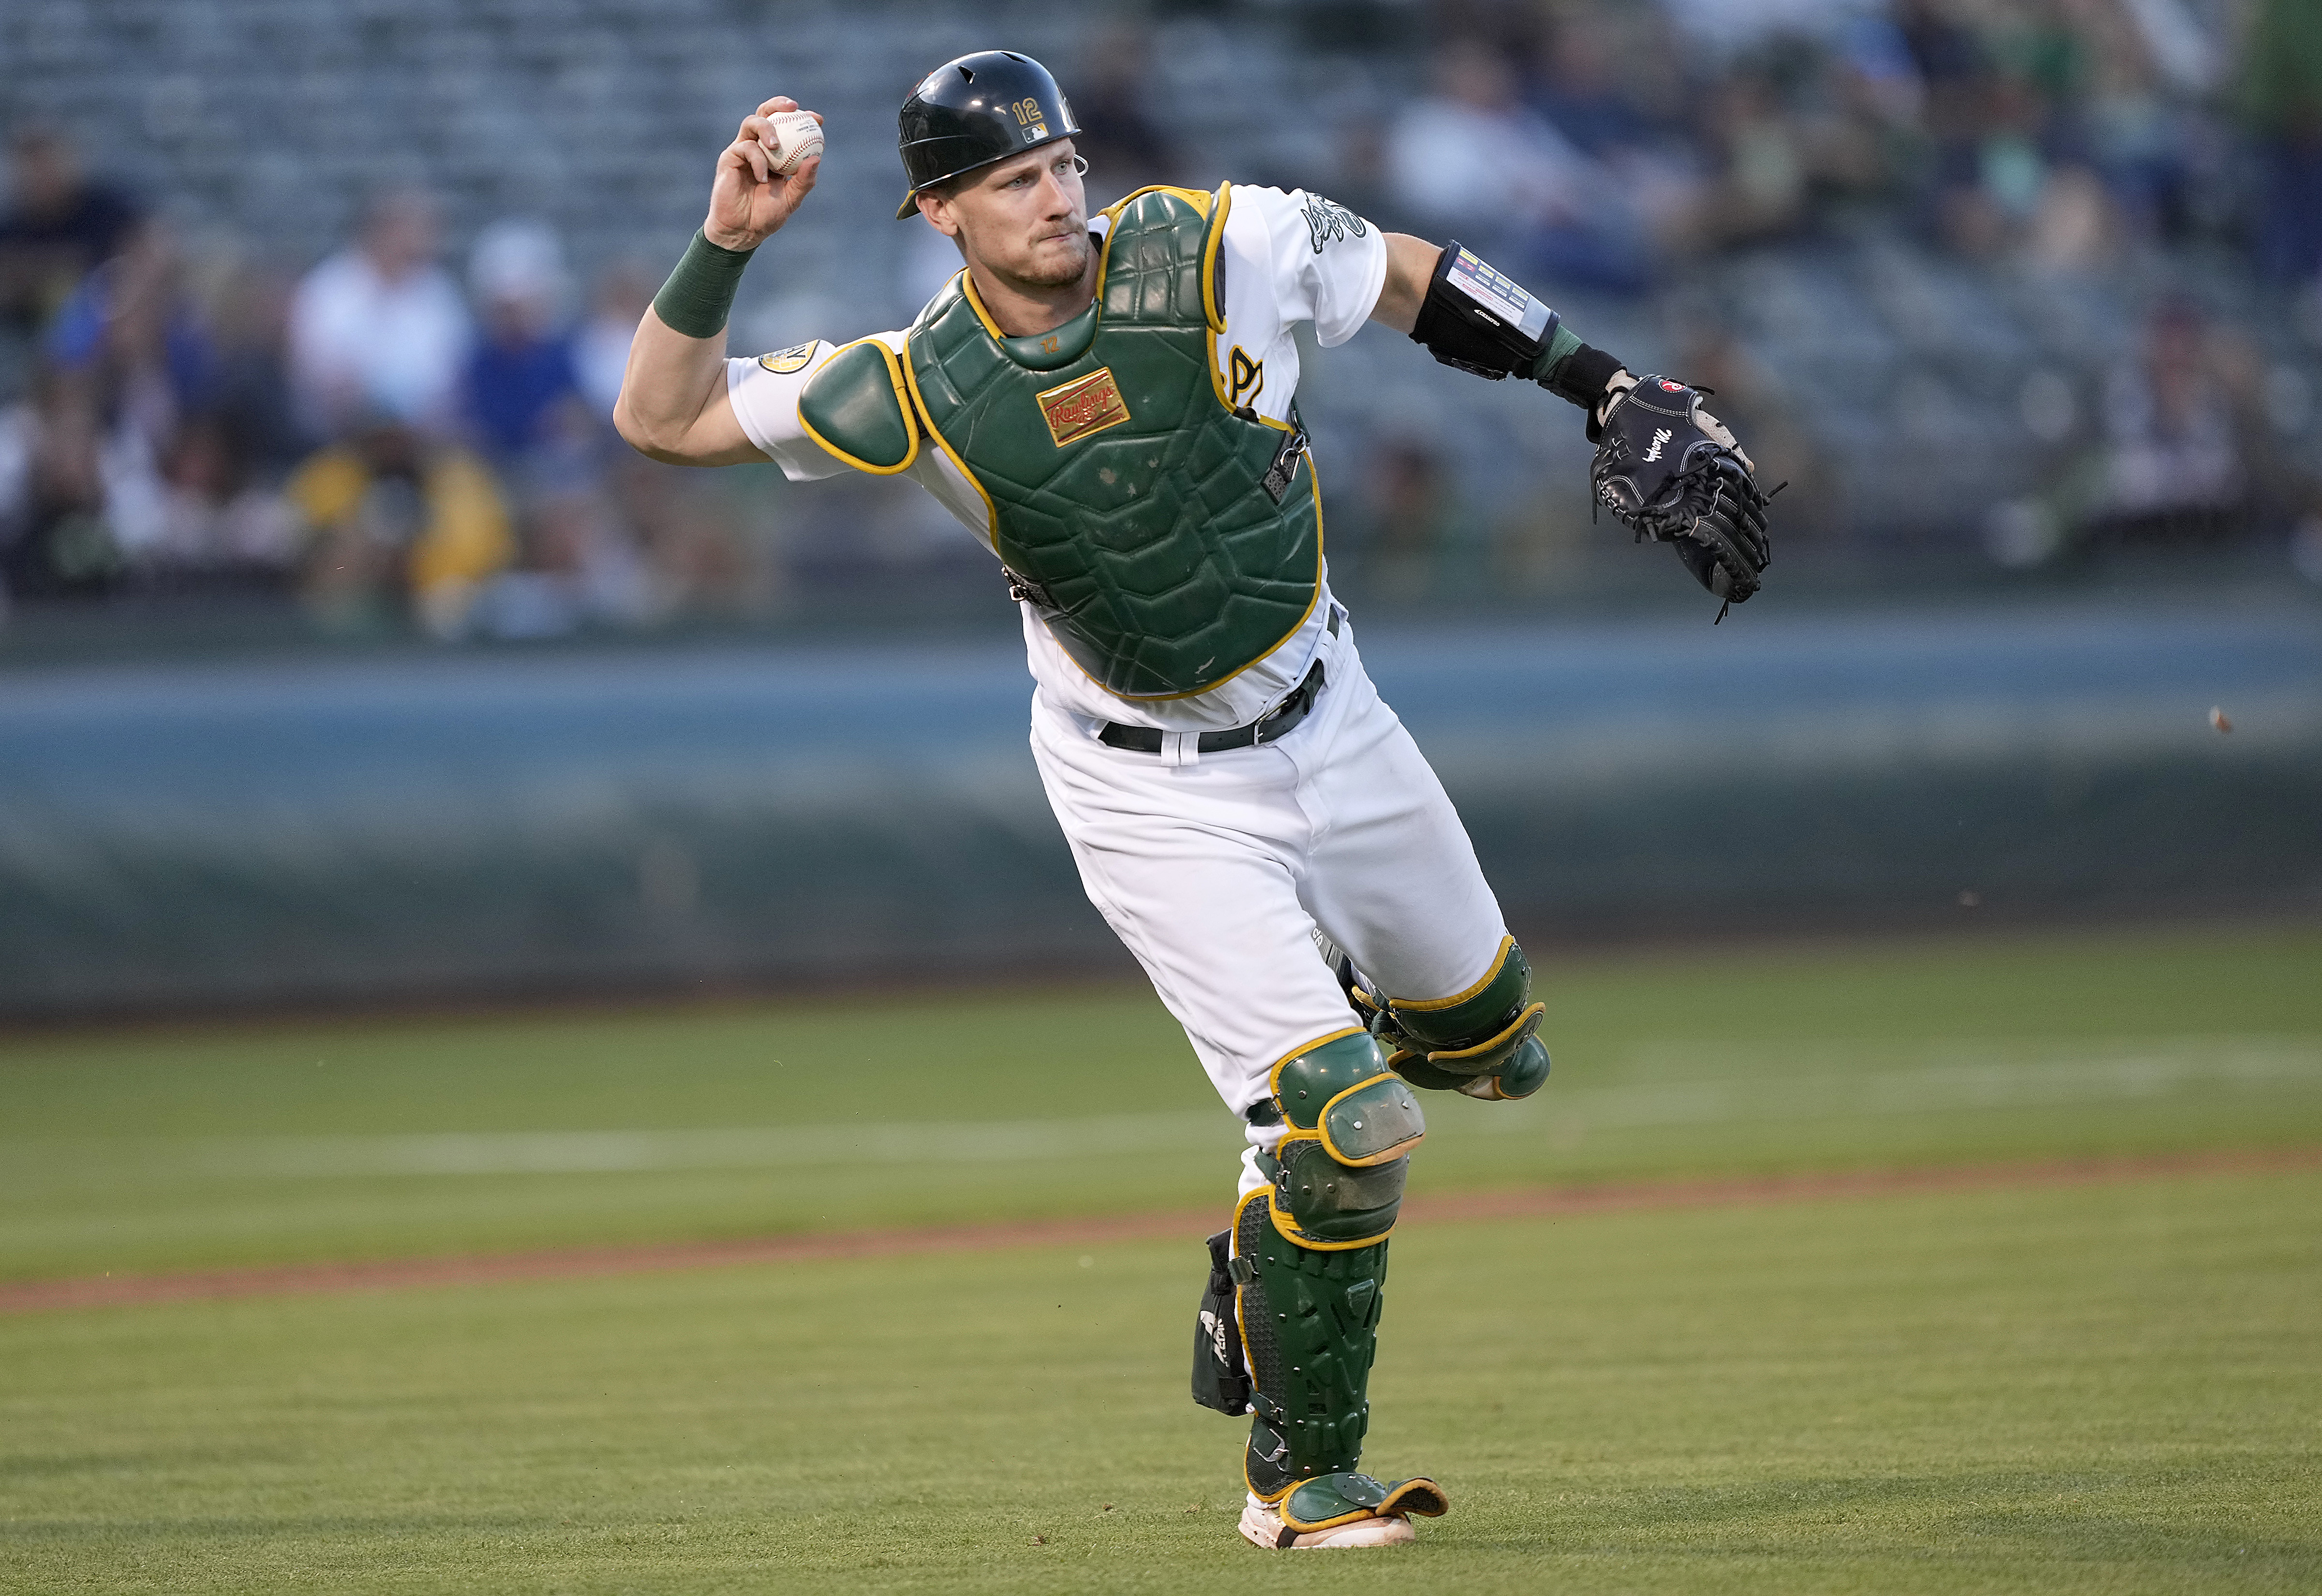 Sean Murphy #12 of the Oakland Athletics throws to first base off balance throwing out JJ Bleday #67 of the Miami Marlins in the top of the third inning at RingCentral Coliseum on August 23, 2022 in Oakland, California.